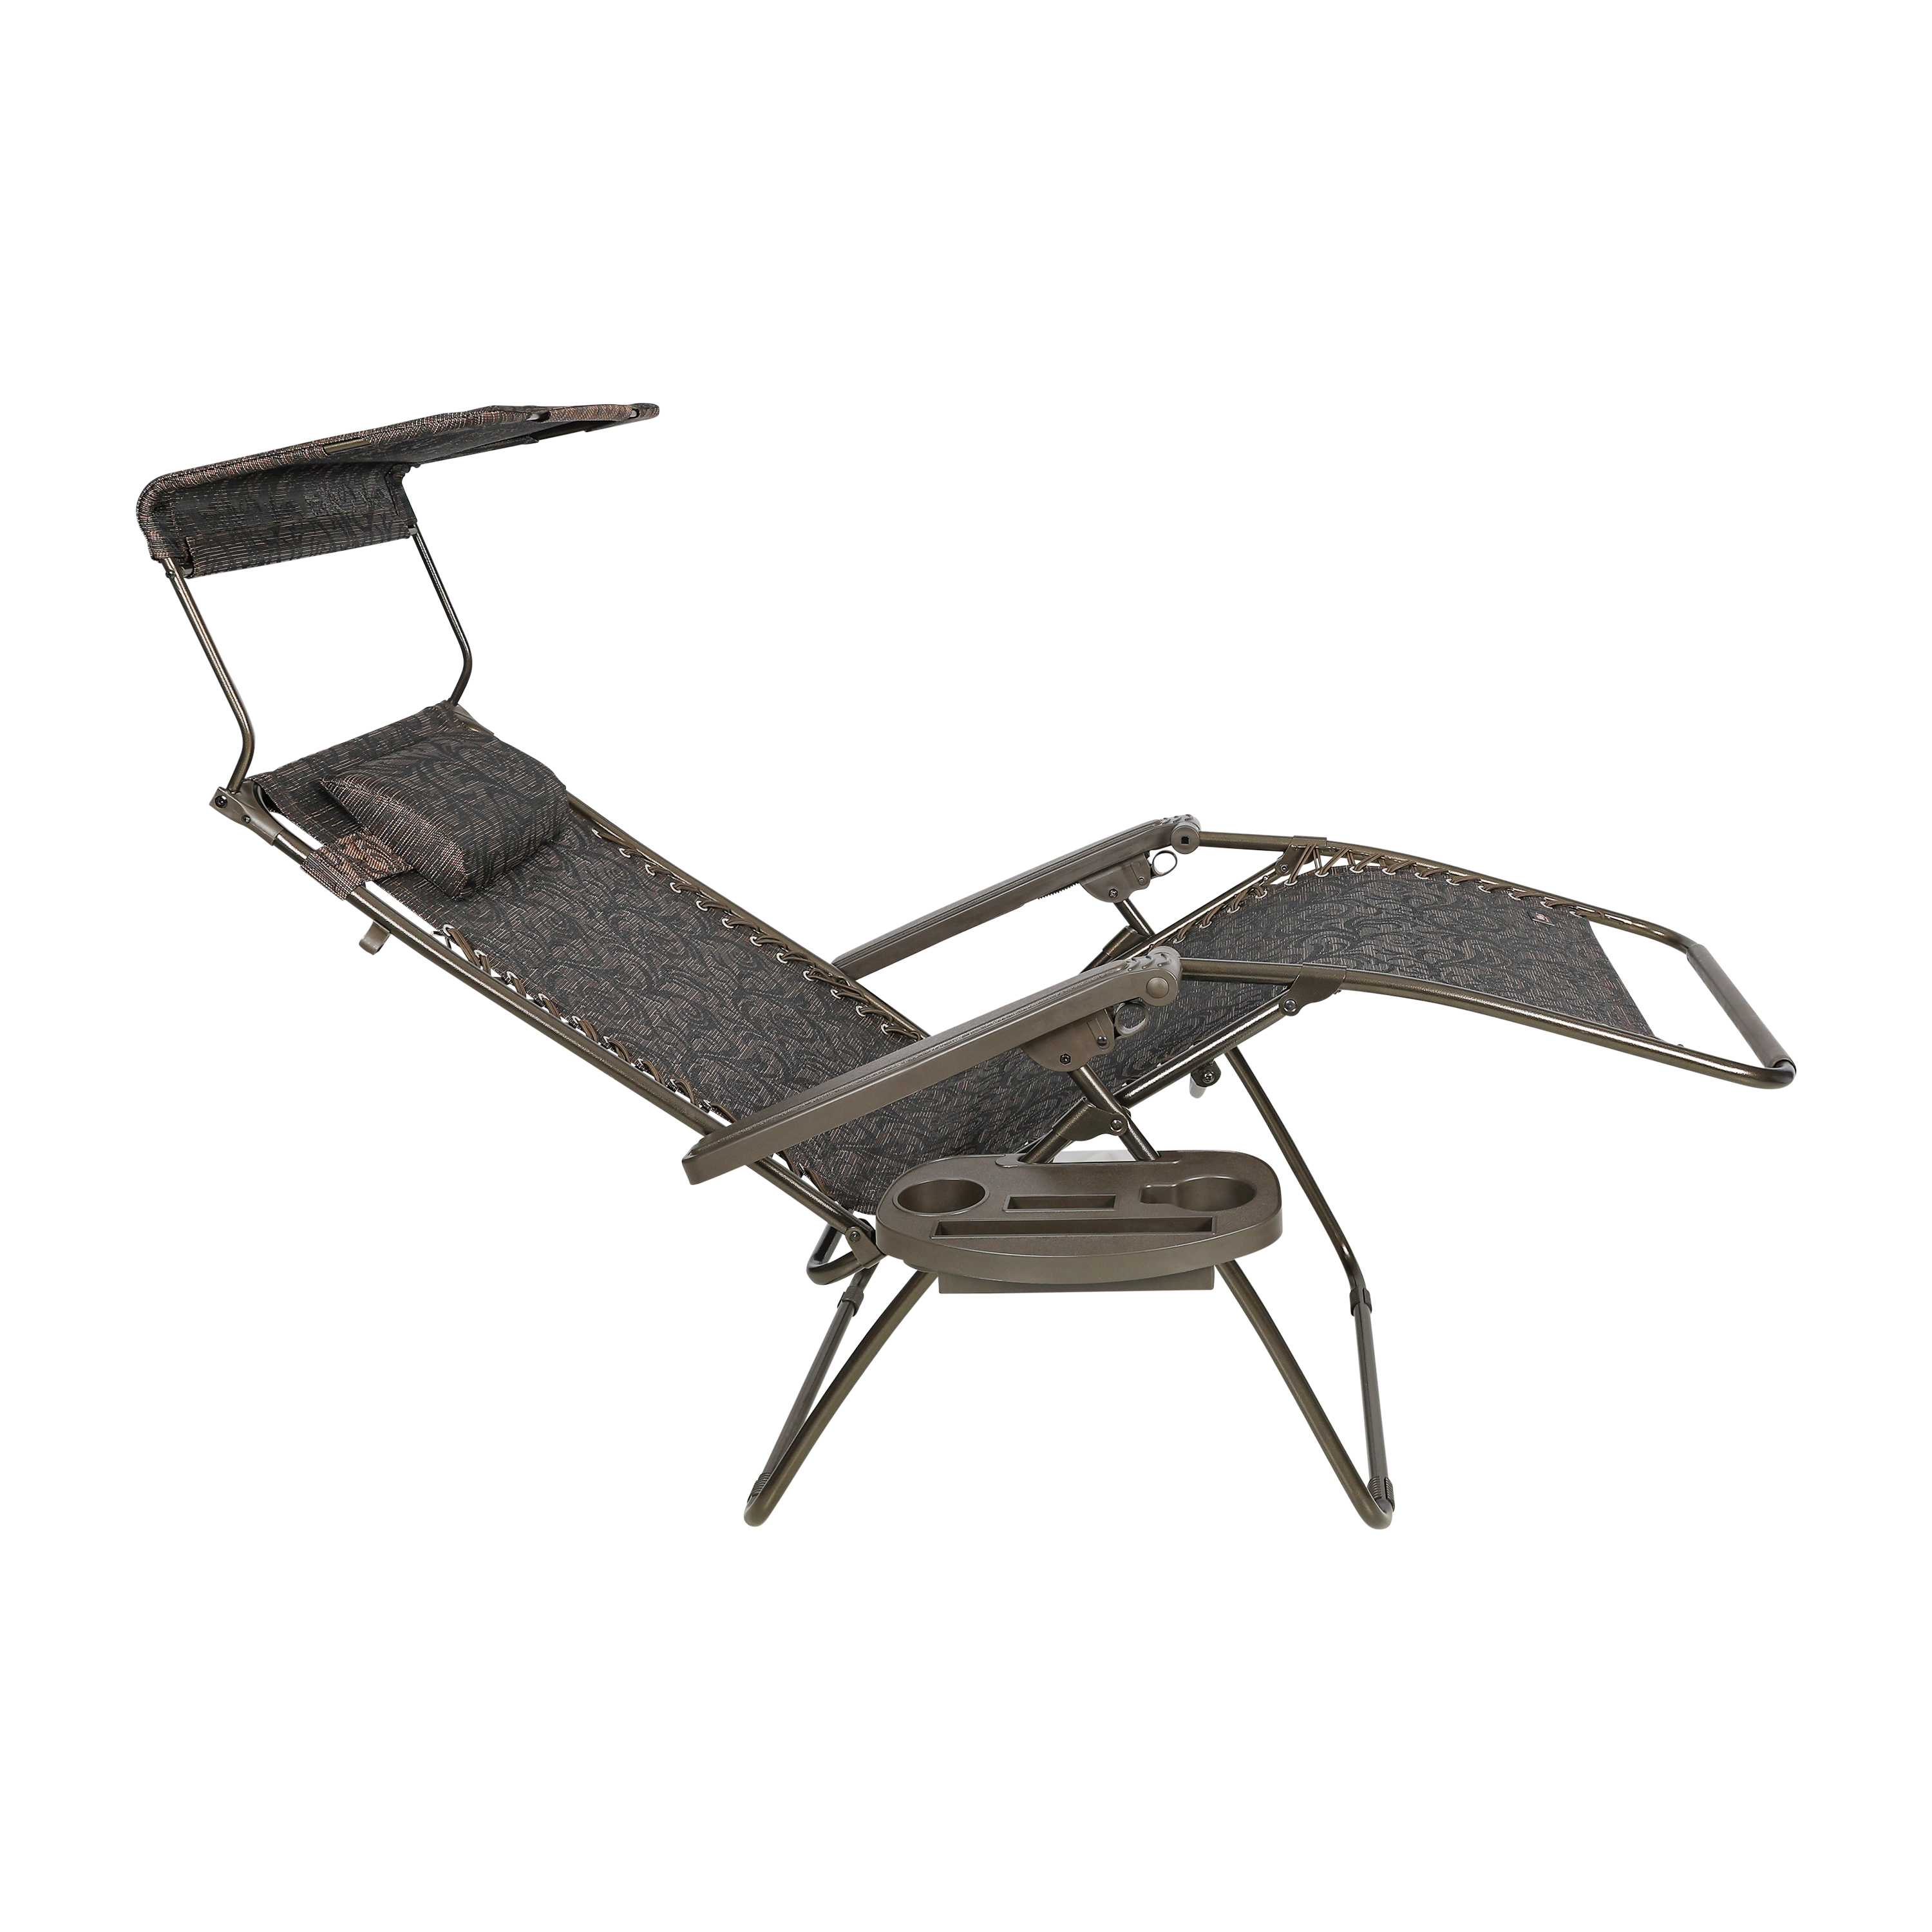 Bliss Hammocks 26-in Wide Zero Gravity Chair w/ Adjustable Canopy Sun-Shade, Drink Tray, & Adjustable Pillow, 300 Lbs Capacity (Jacquard) - image 2 of 3